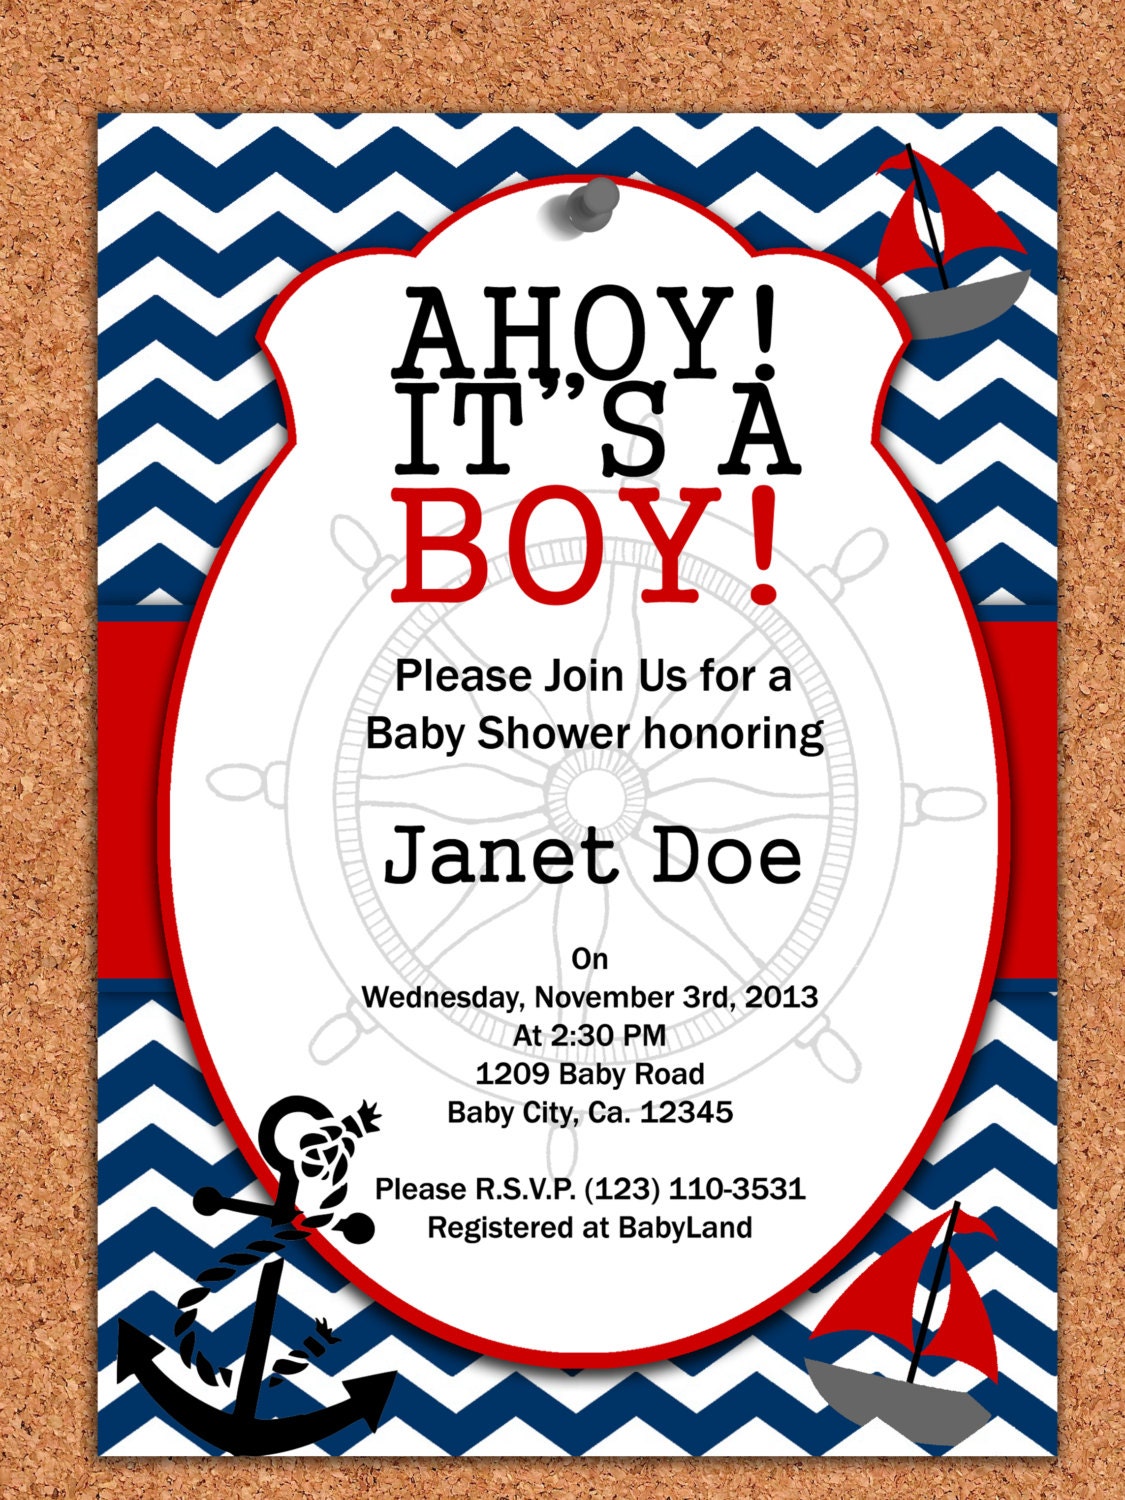 printable-invitation-nautical-baby-shower-by-atomdesign-on-etsy